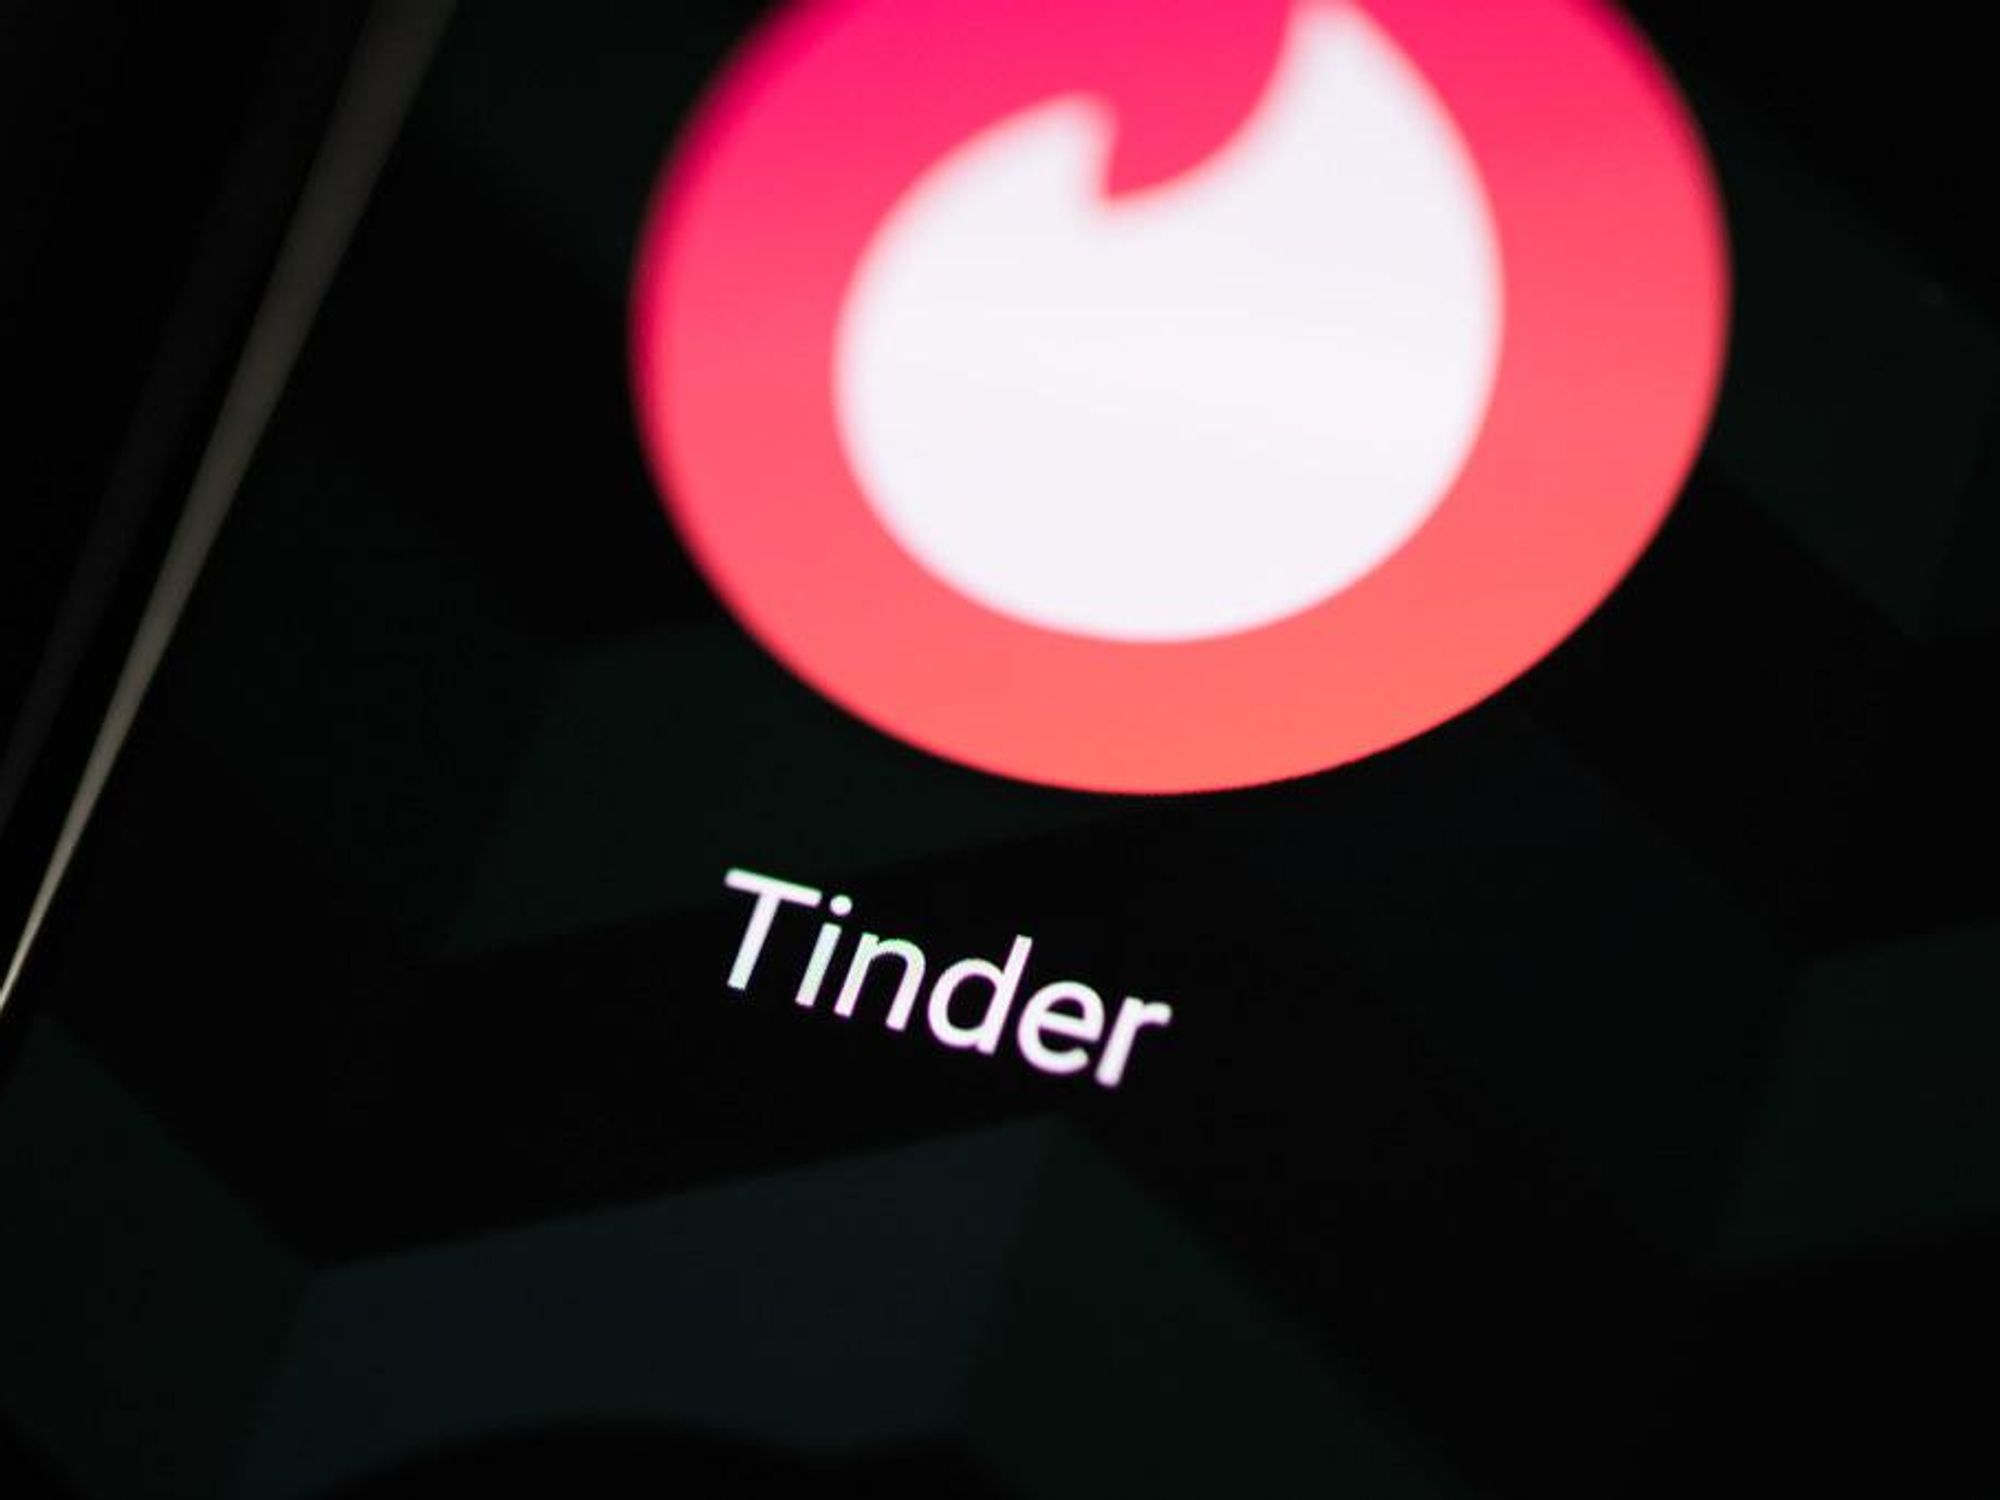 Tinder rolls out 'Blind Date' feature to introduce more authenticity